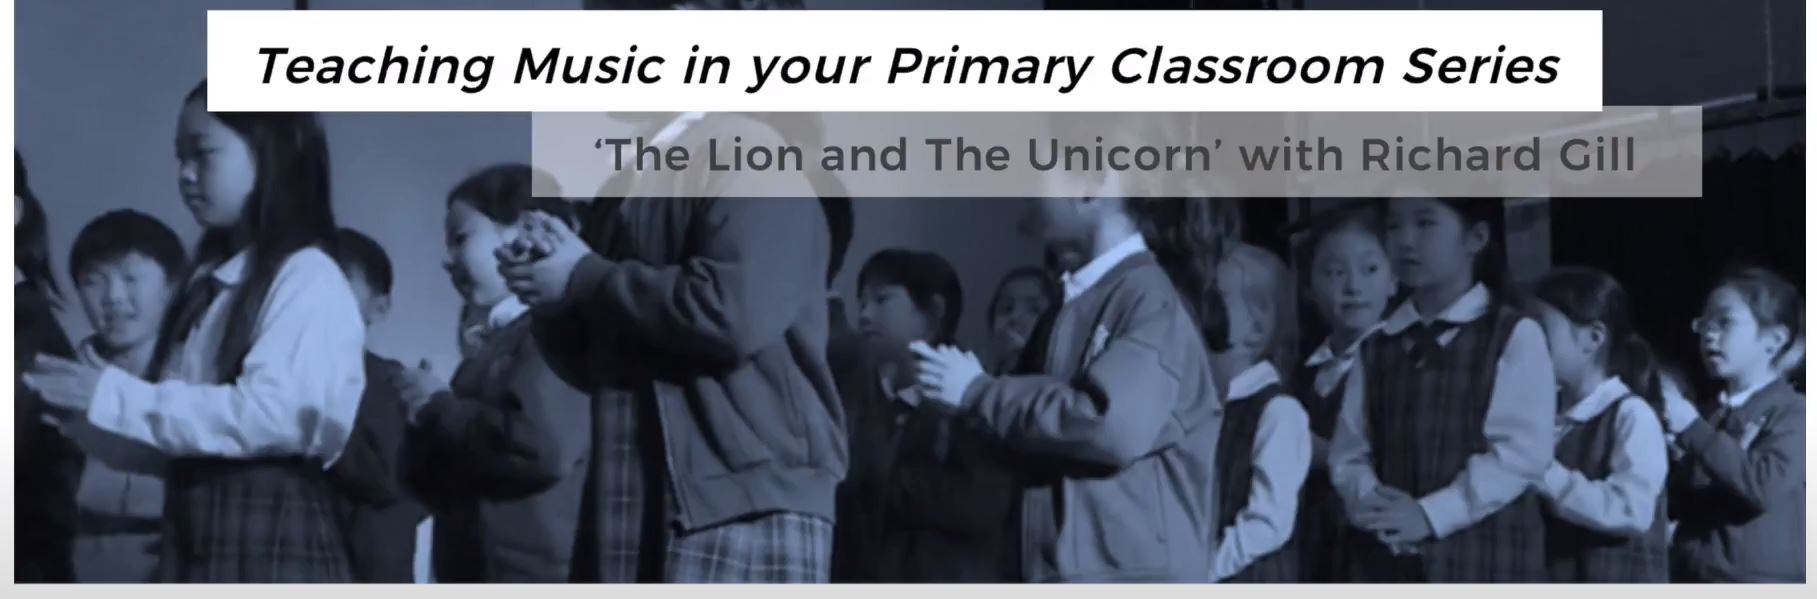 Title image: Teaching music in your primary classroom with Richard Gill